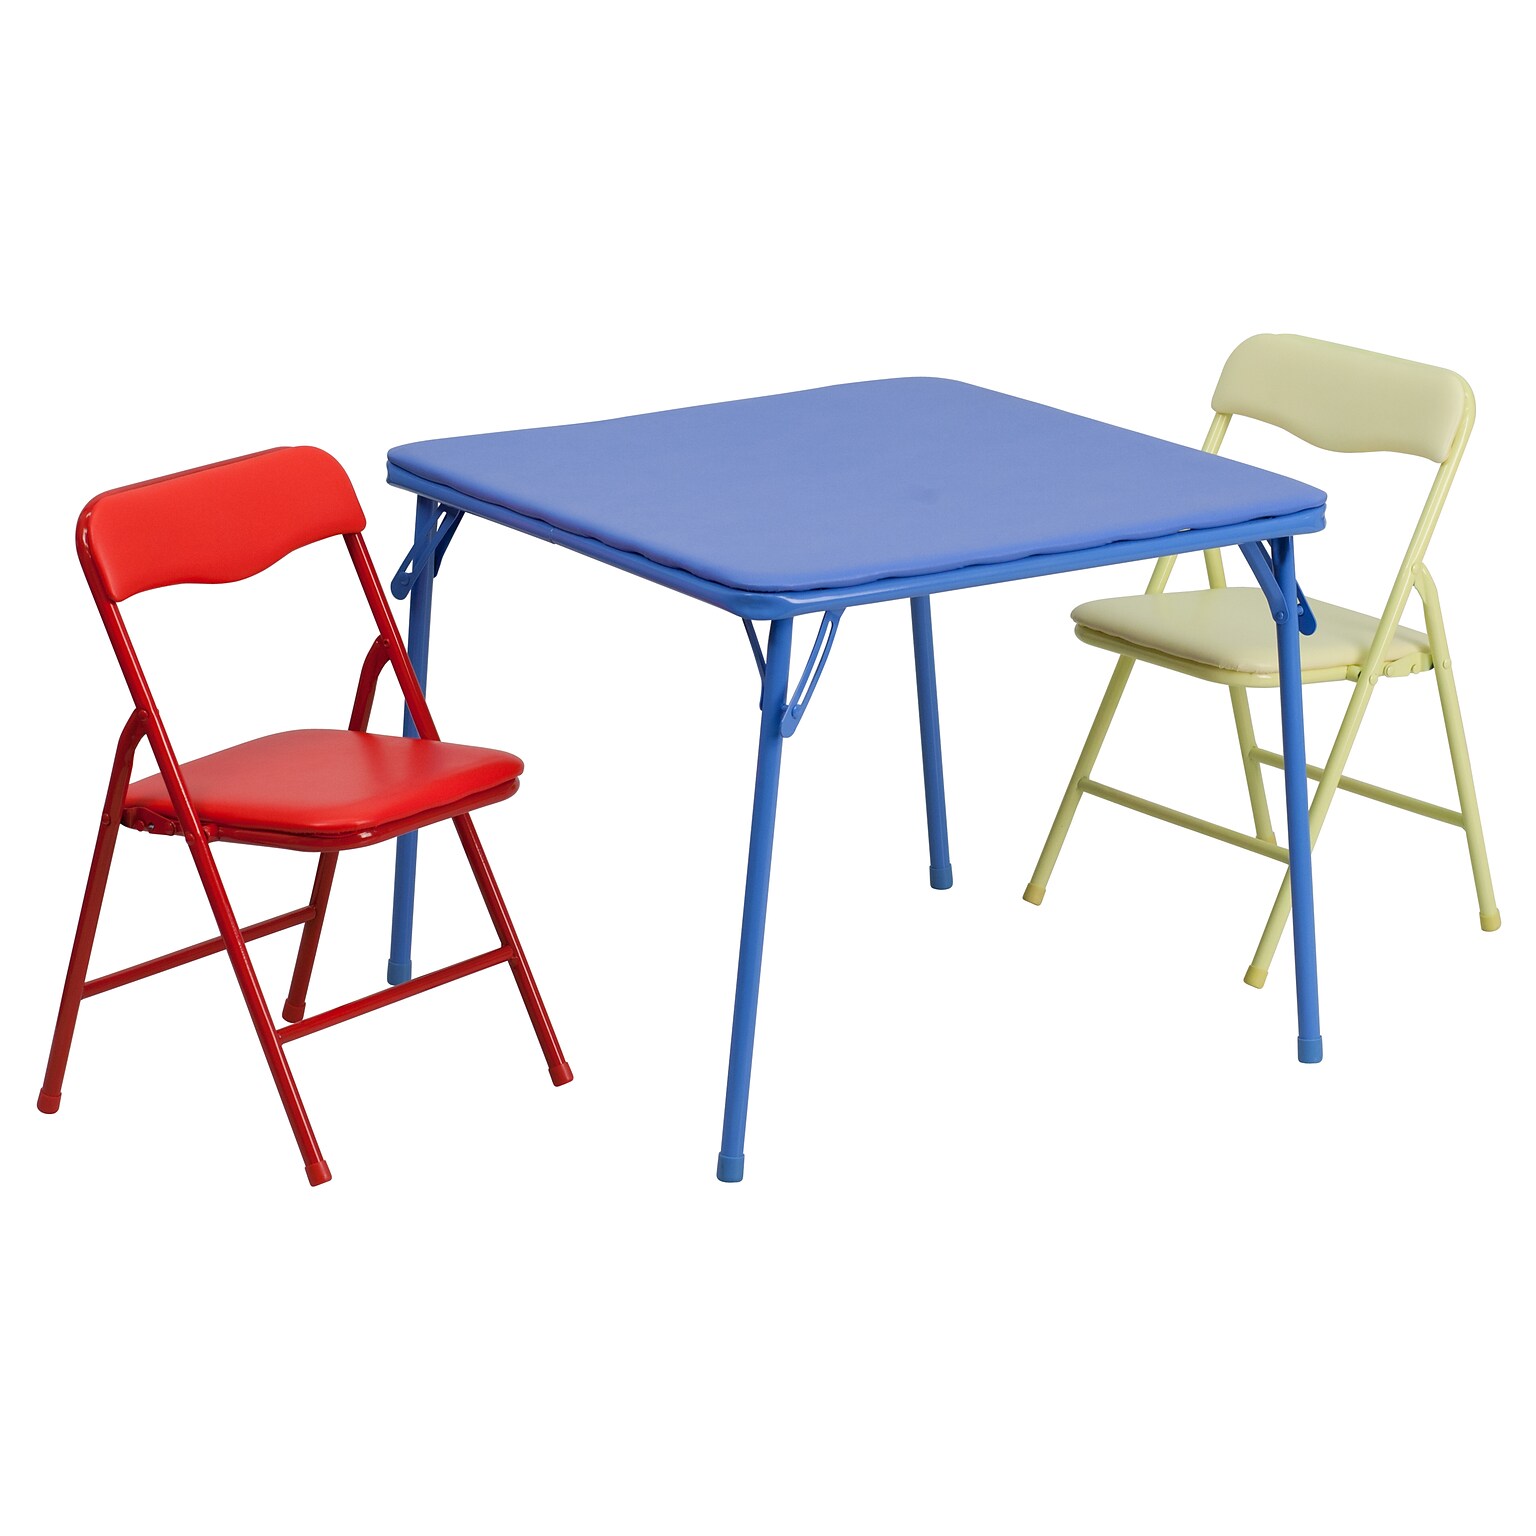 Flash Furniture Mindy Square Kids 3 Piece Folding Table and Chair Set, 24 x 24, Multicolored (JB10CARD)